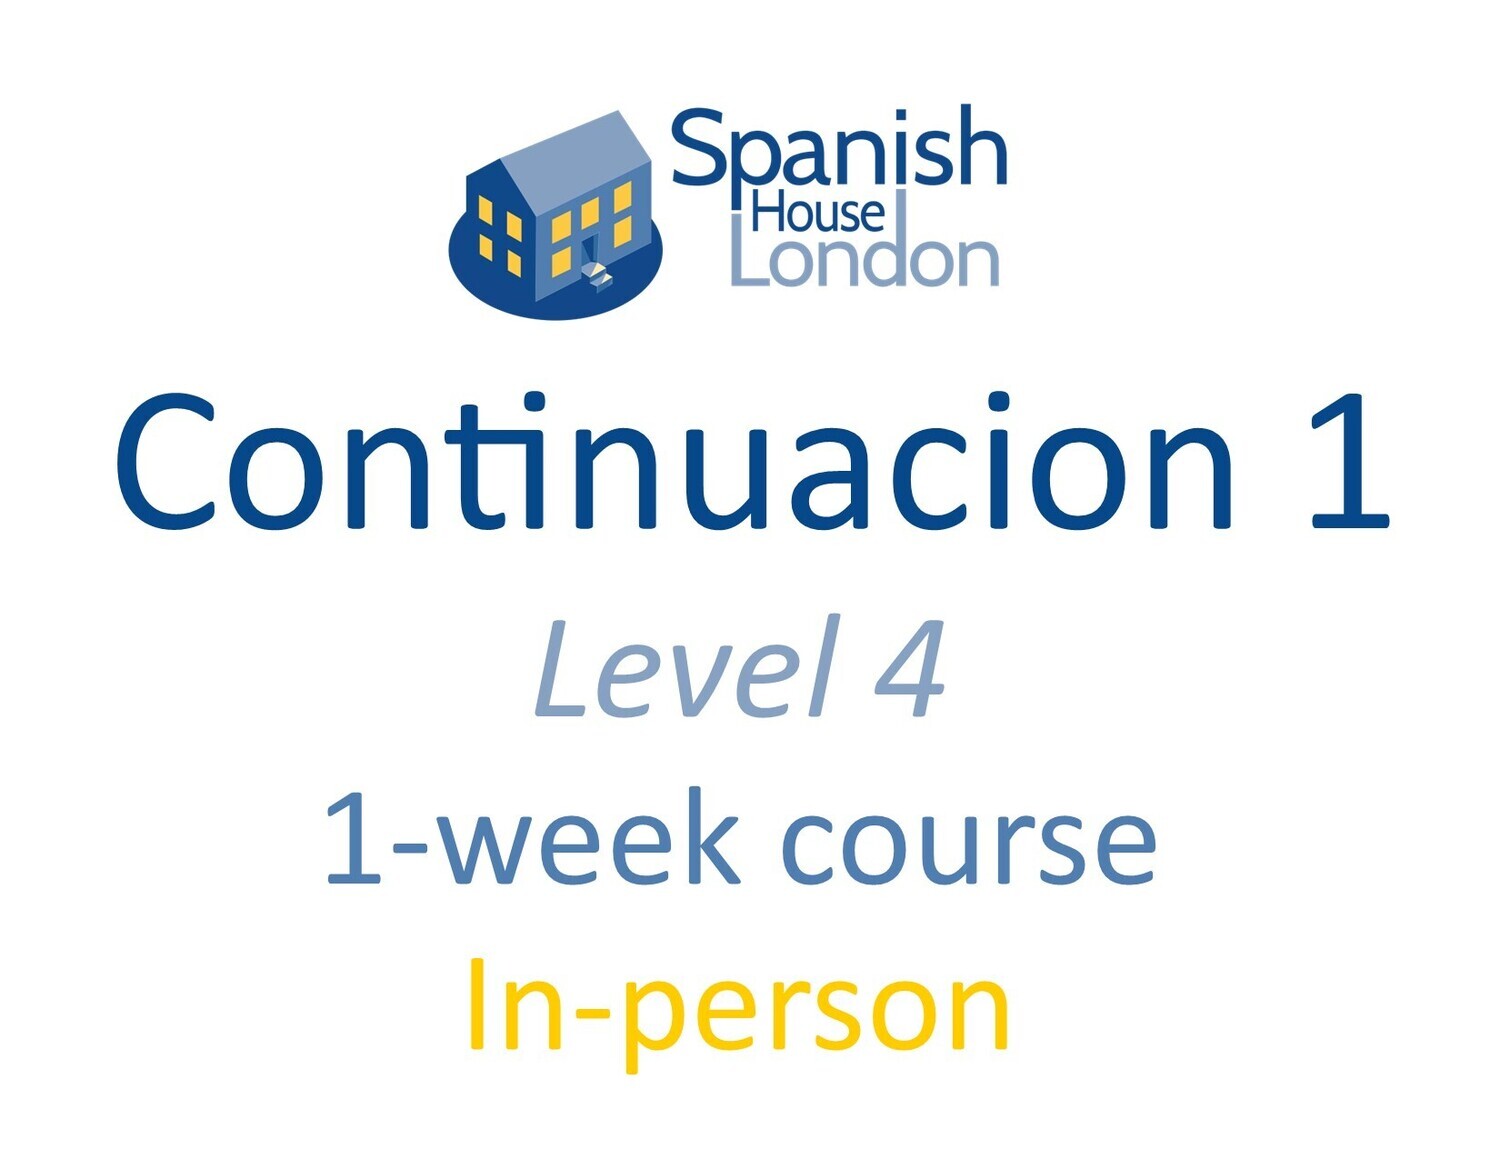 One-Week Intensive Continuacion 1 Course starting on 30th January at 10.30am in Clapham North